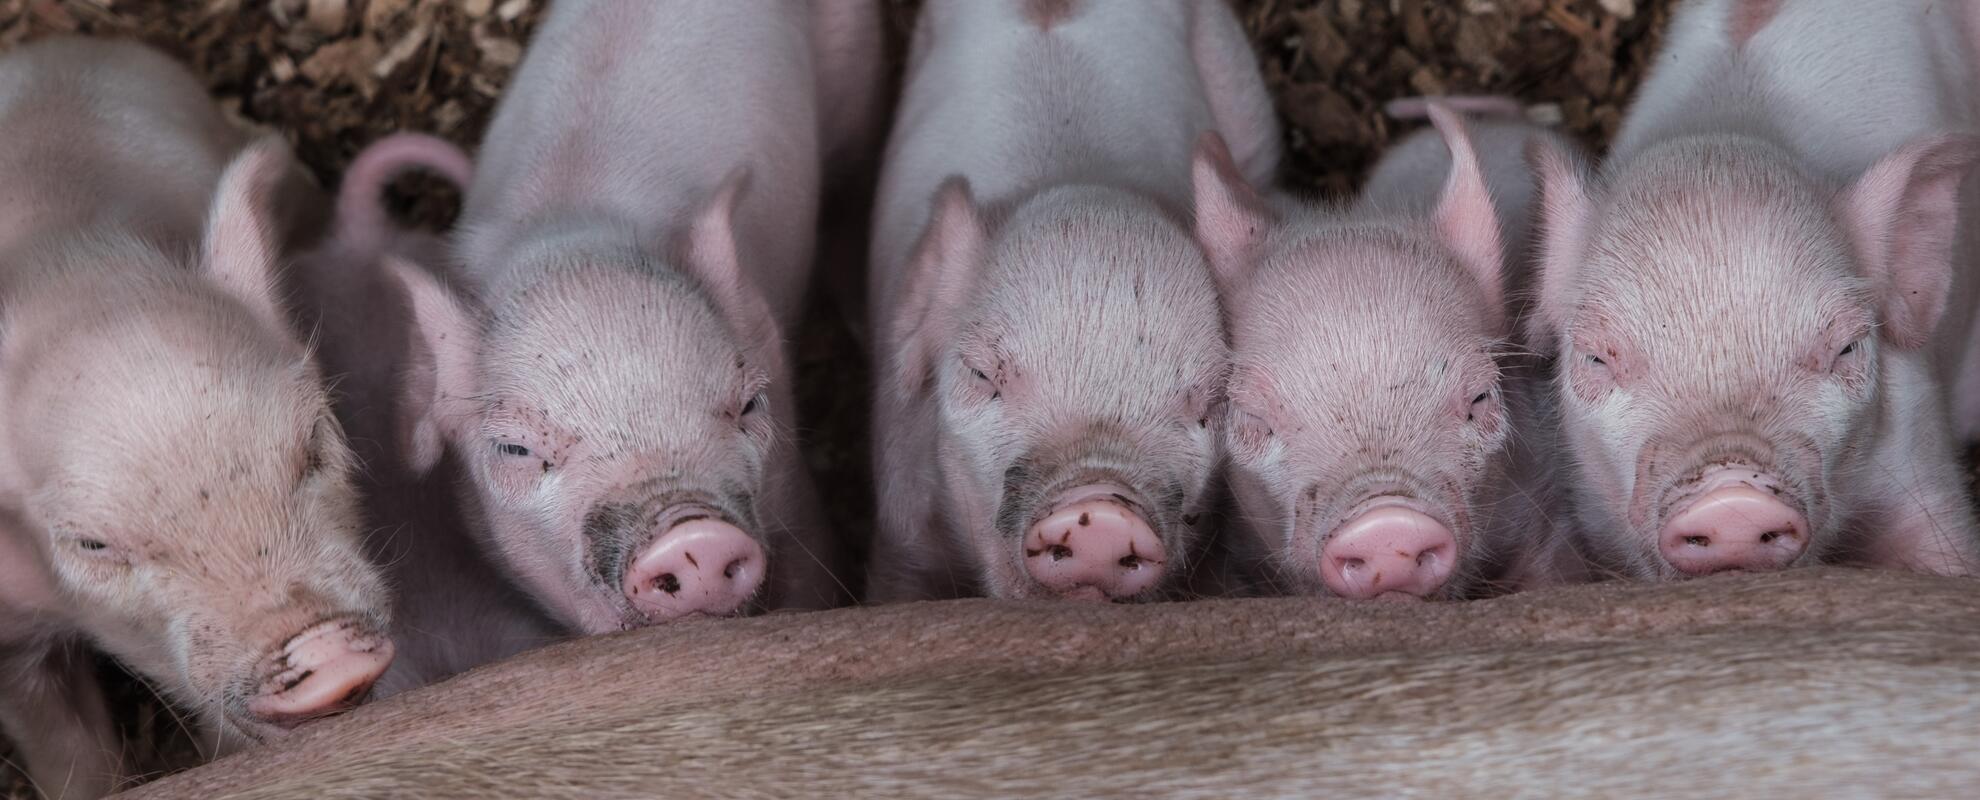 Intergrated herd health to improve pig production 